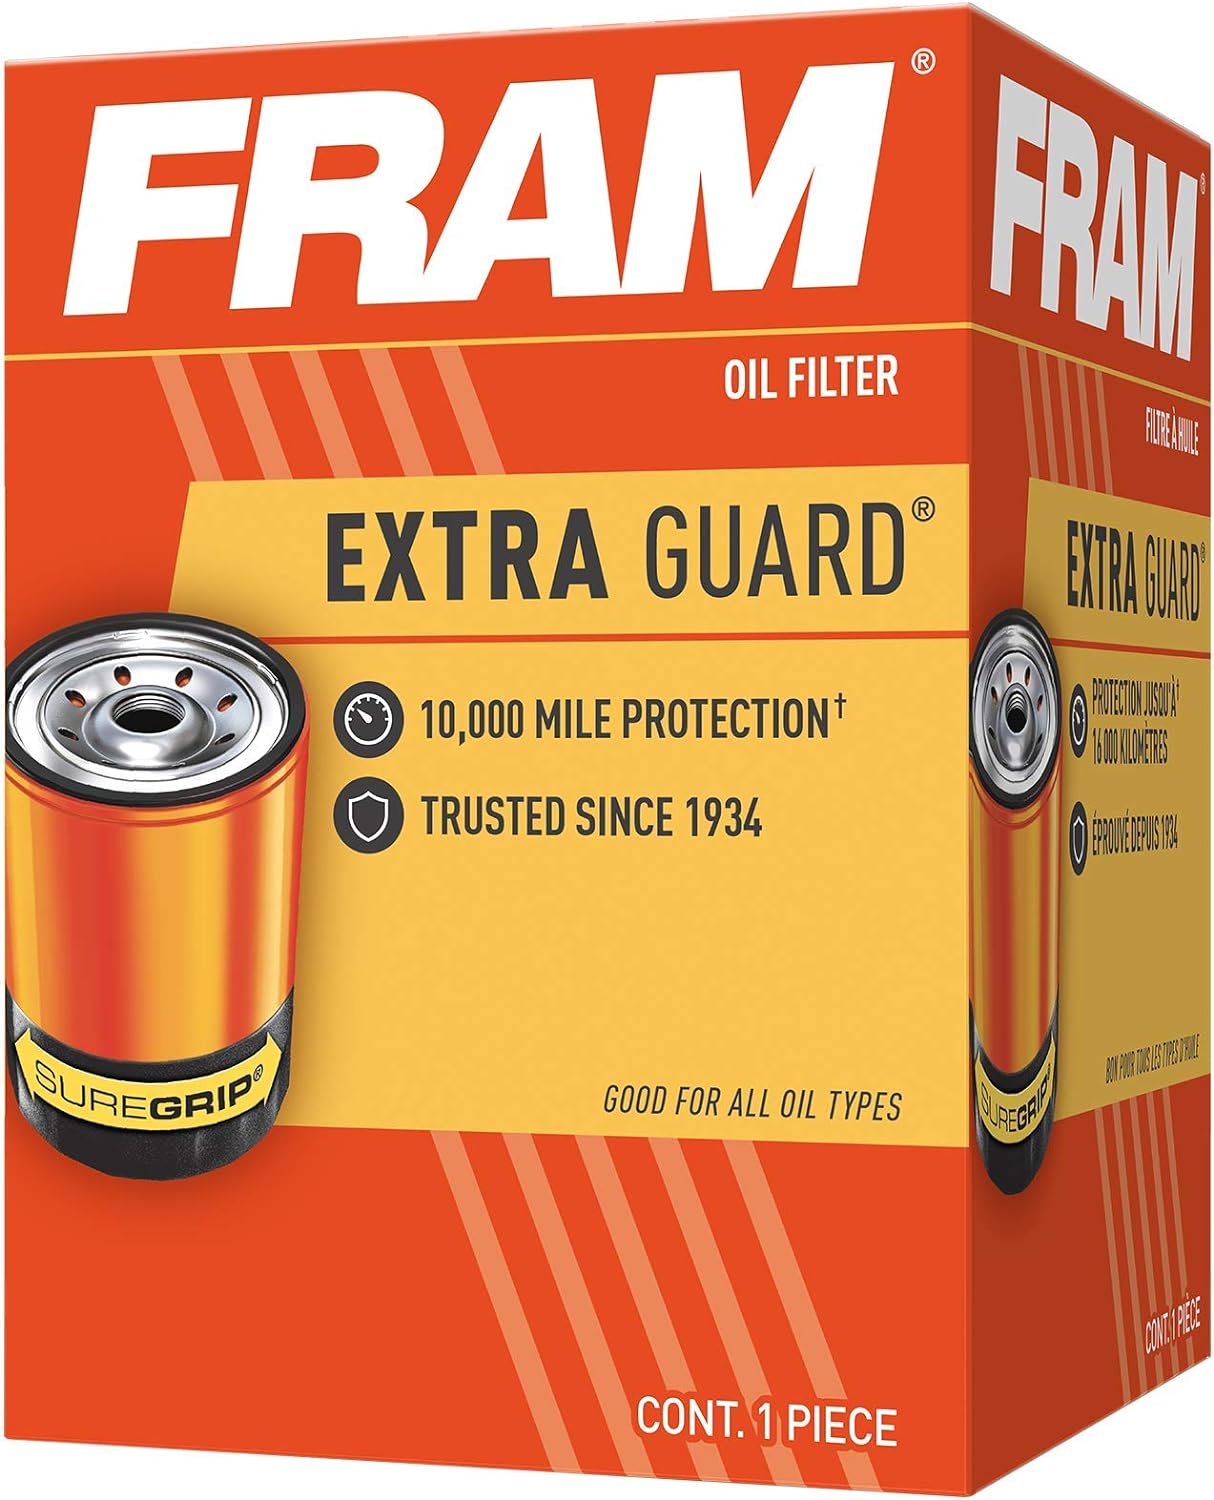 Fram Extra Guard Oil Filter review